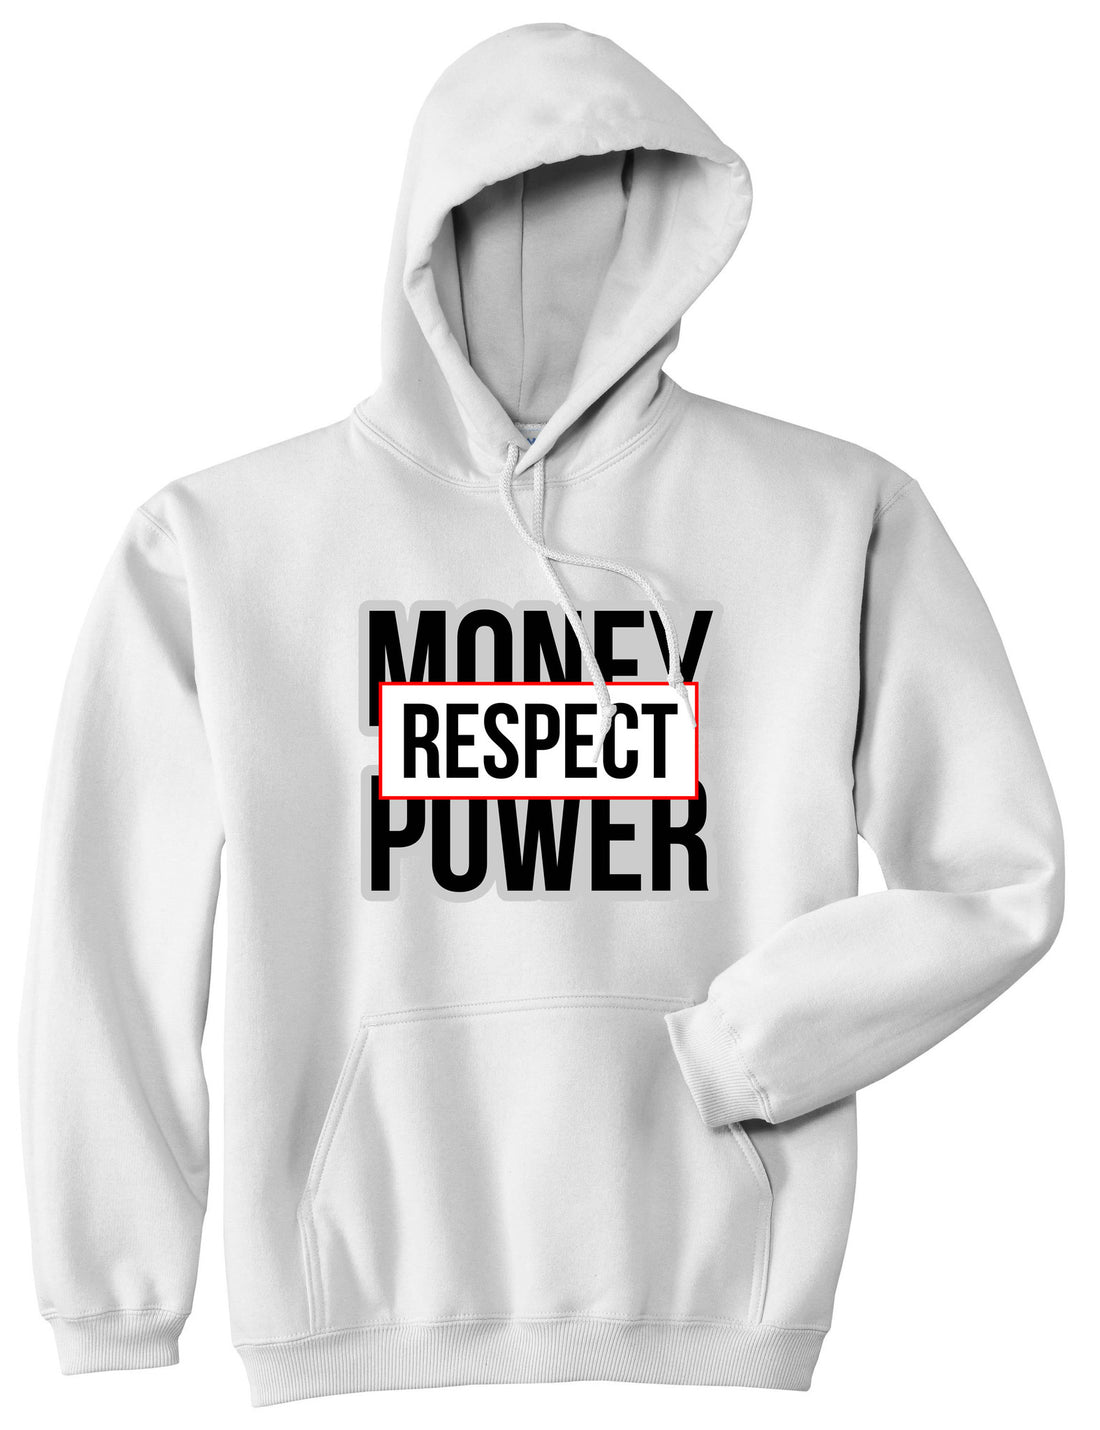 Money Power Respect Pullover Hoodie in White By Kings Of NY